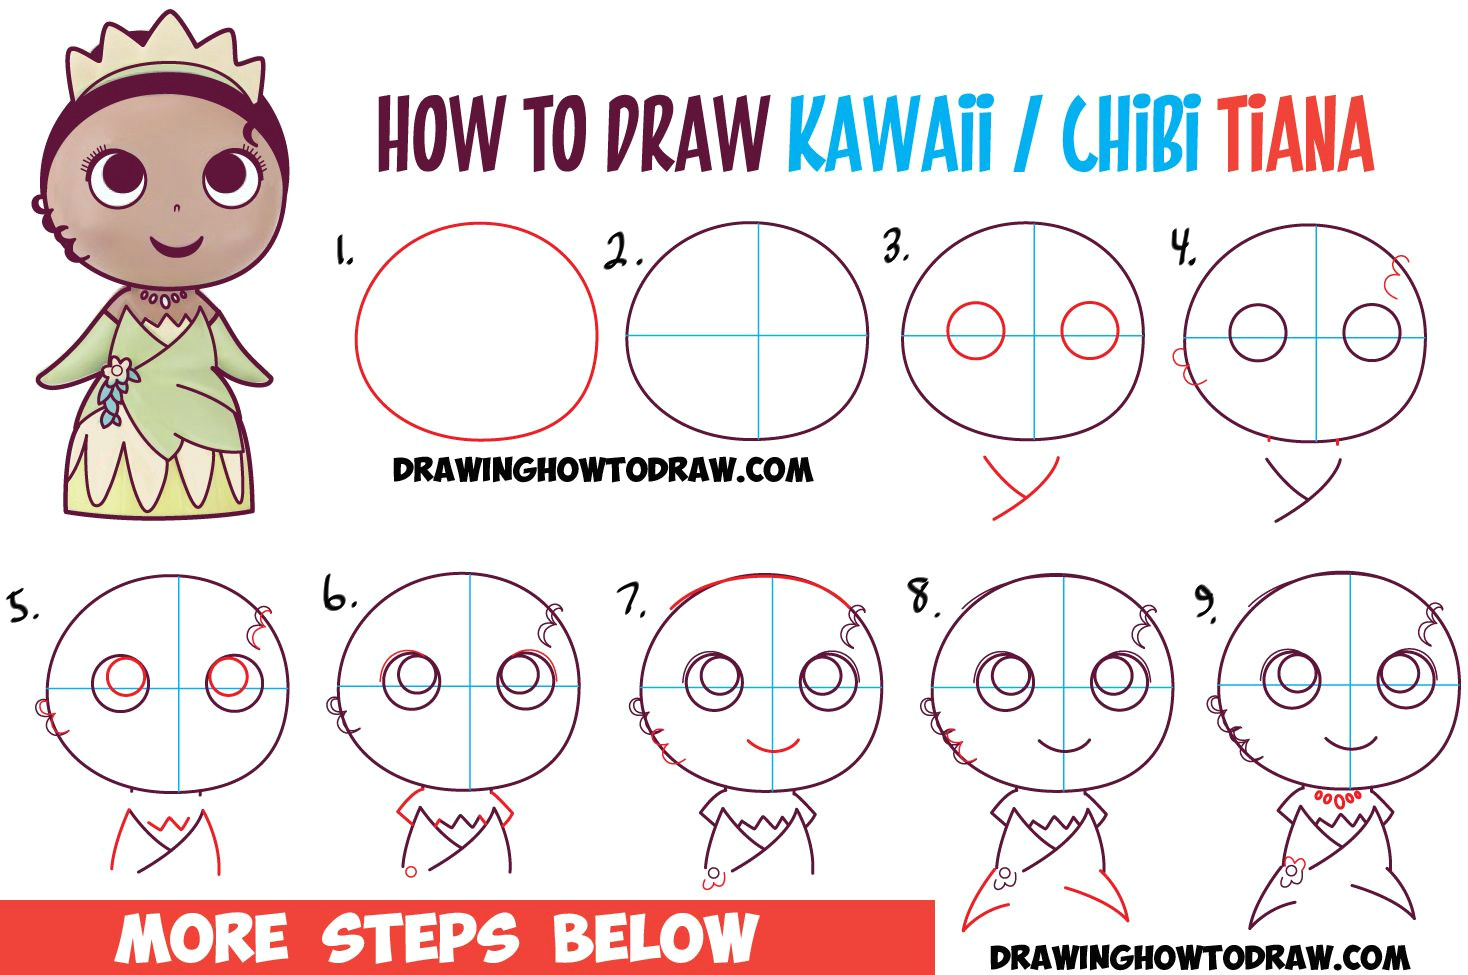 Cinderella Pictures Easy to Draw How to Draw Cute Baby Chibi Kawaii Tiana the Disney Princess